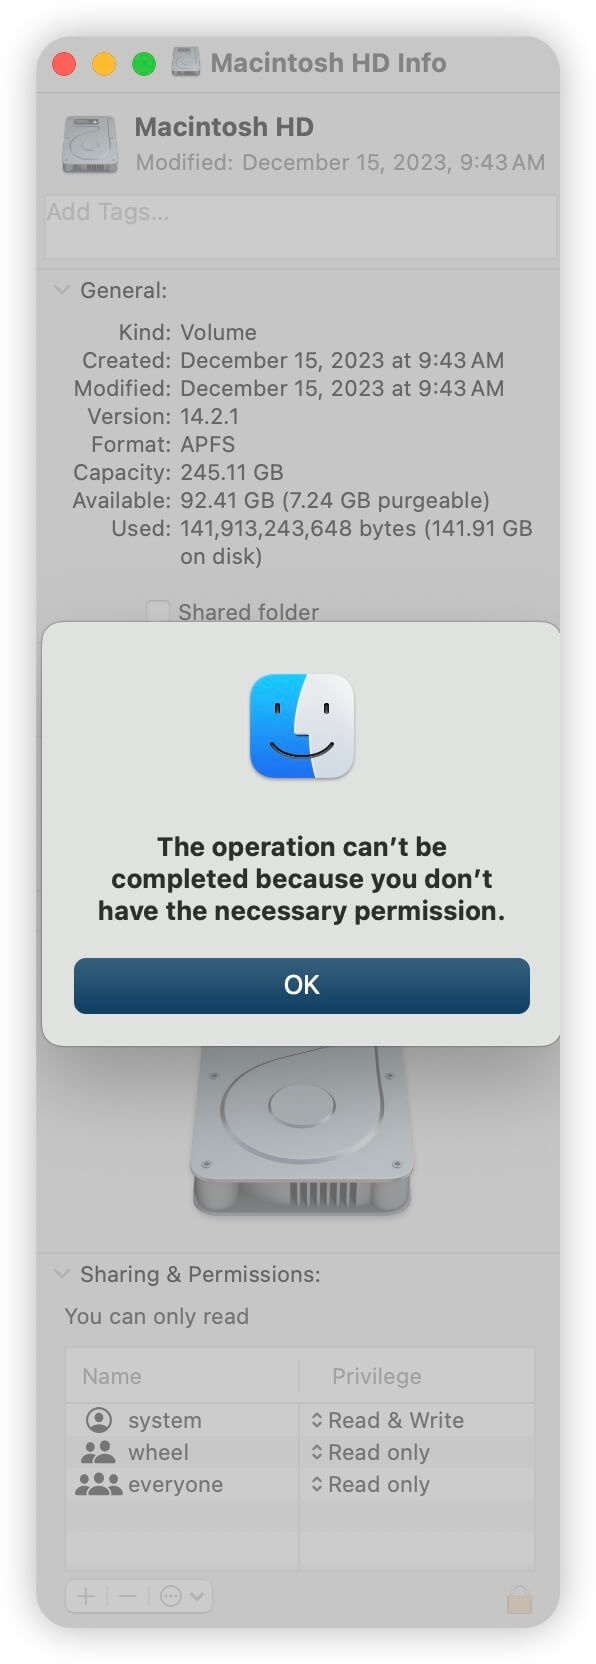 You don't have permission to modify access permission to Macintosh HD